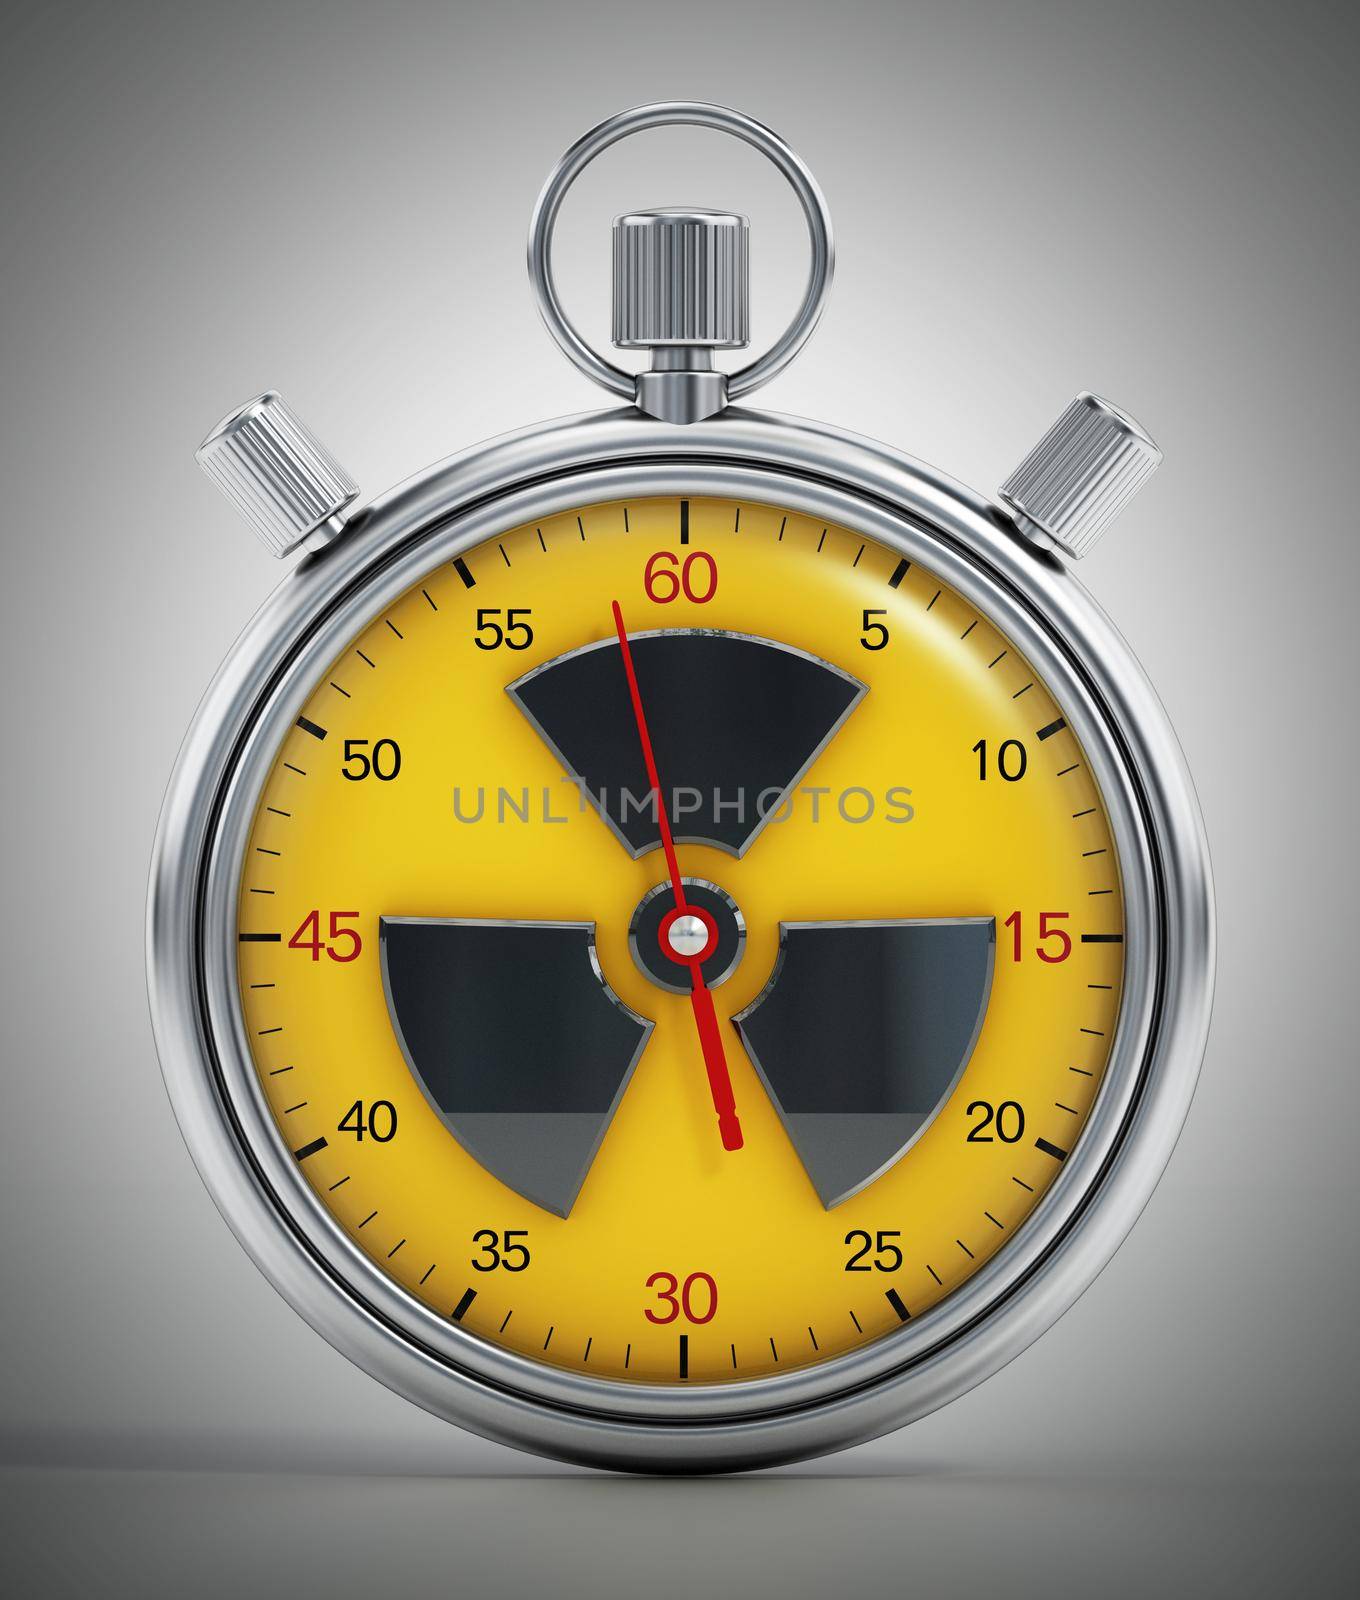 Chronometer with radiation icon. Nuclear war countdown concept. 3D illustration by Simsek